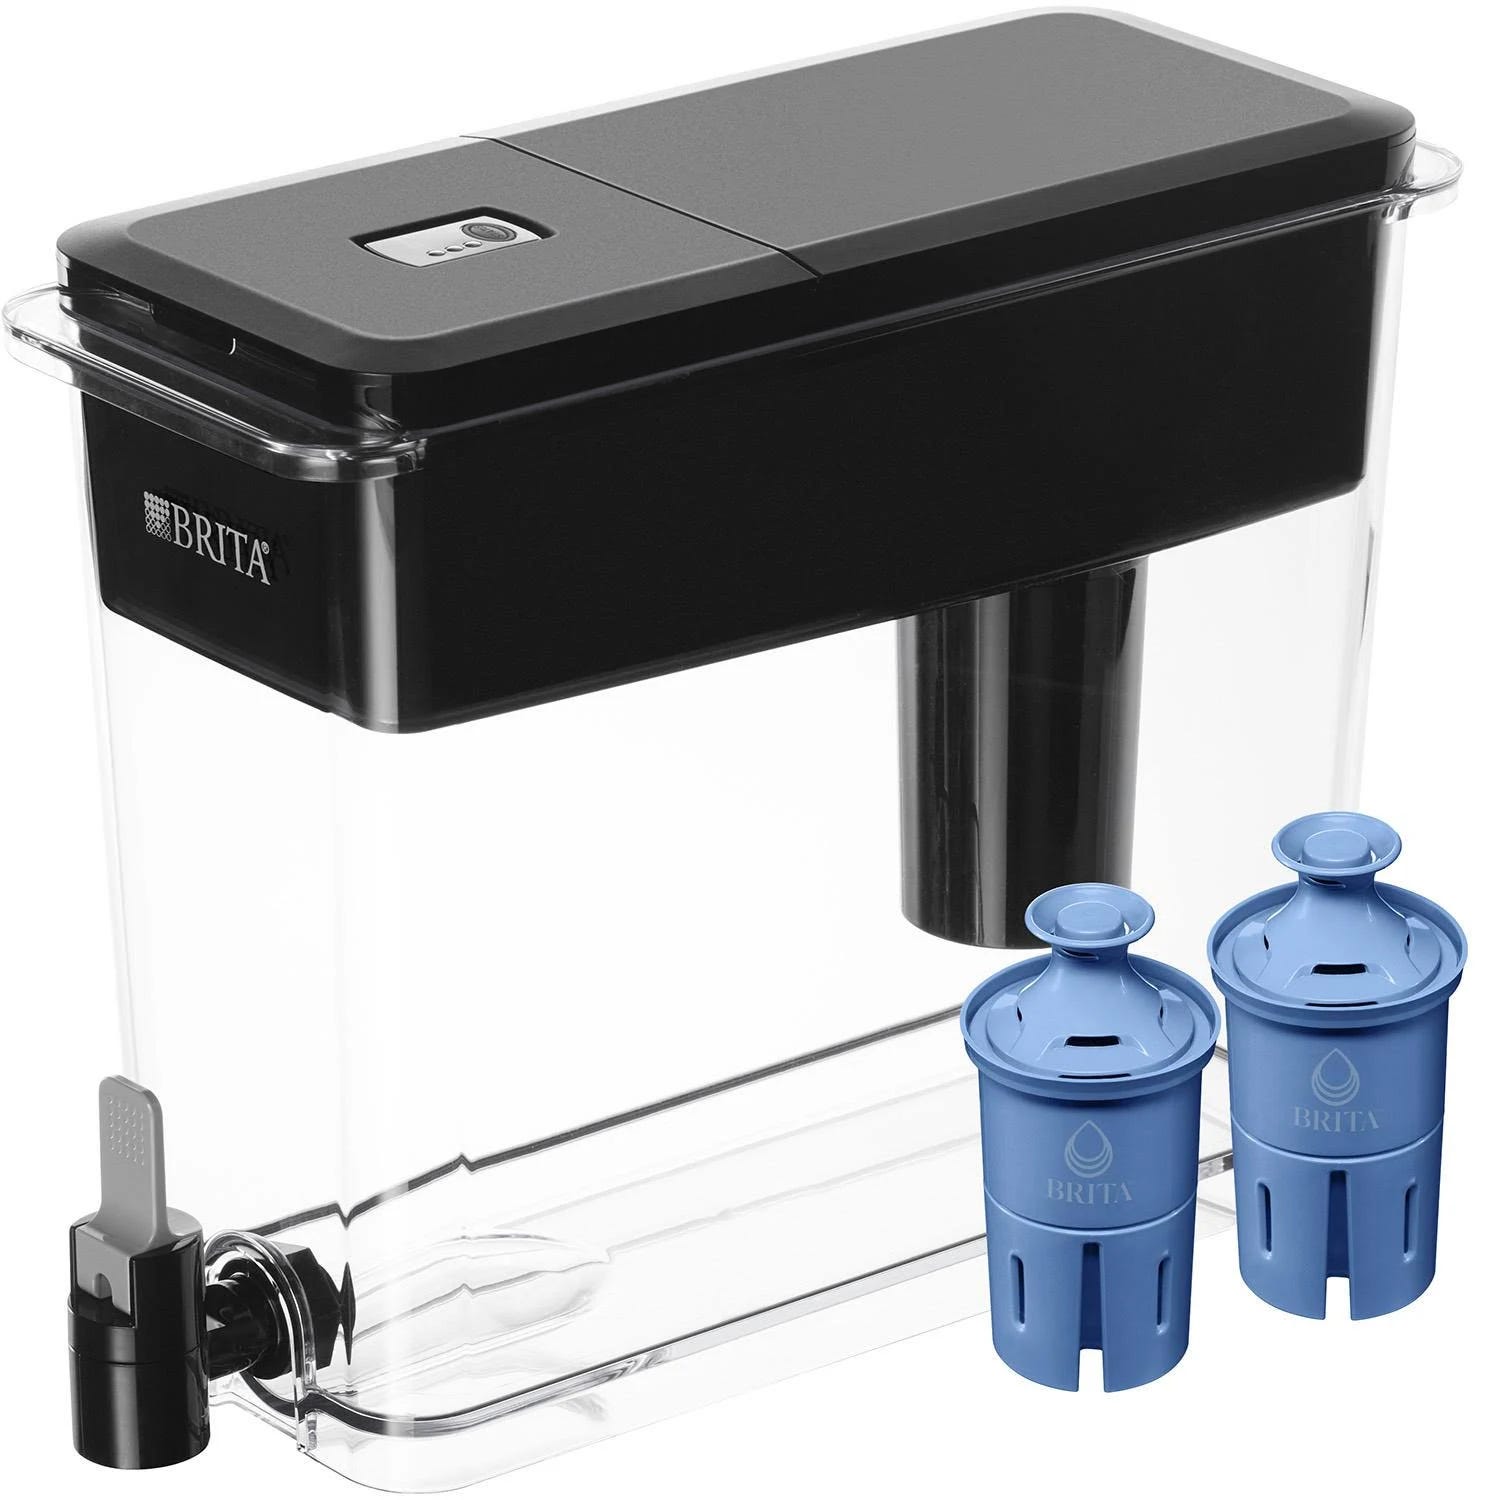 Brita Elite Fridge-Friendly 27 Cup Water Dispenser Filtered Water Pitcher with Advanced Carbon Core Technology and 2 Filters | Image